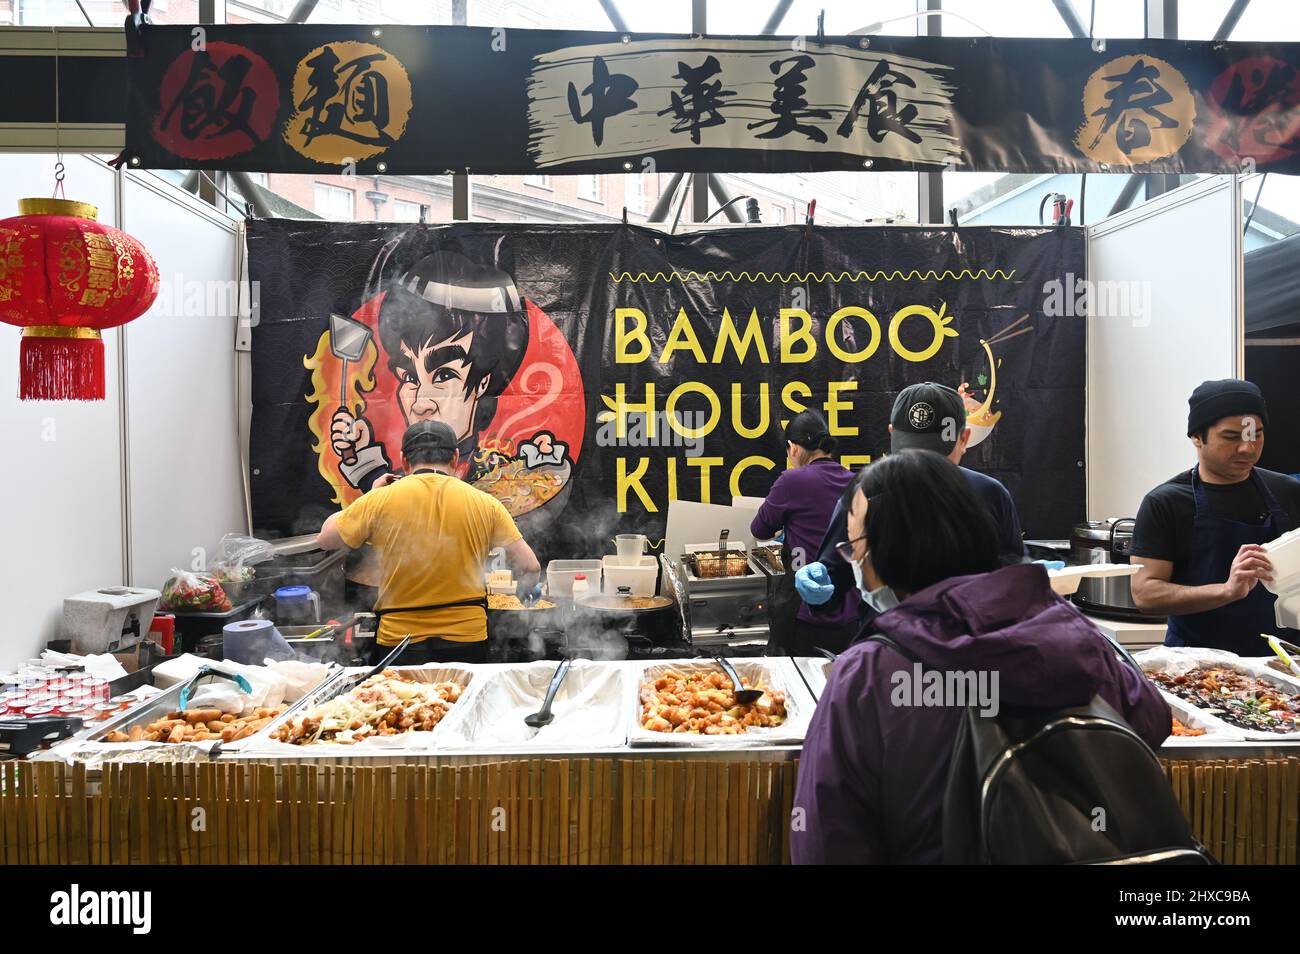 London, UK. 11 March 2022. Bamboo House Kitchen food stall at Ideal Home Show 2022 at Olympia London. Credit: Picture Capital/Alamy Live News Stock Photo